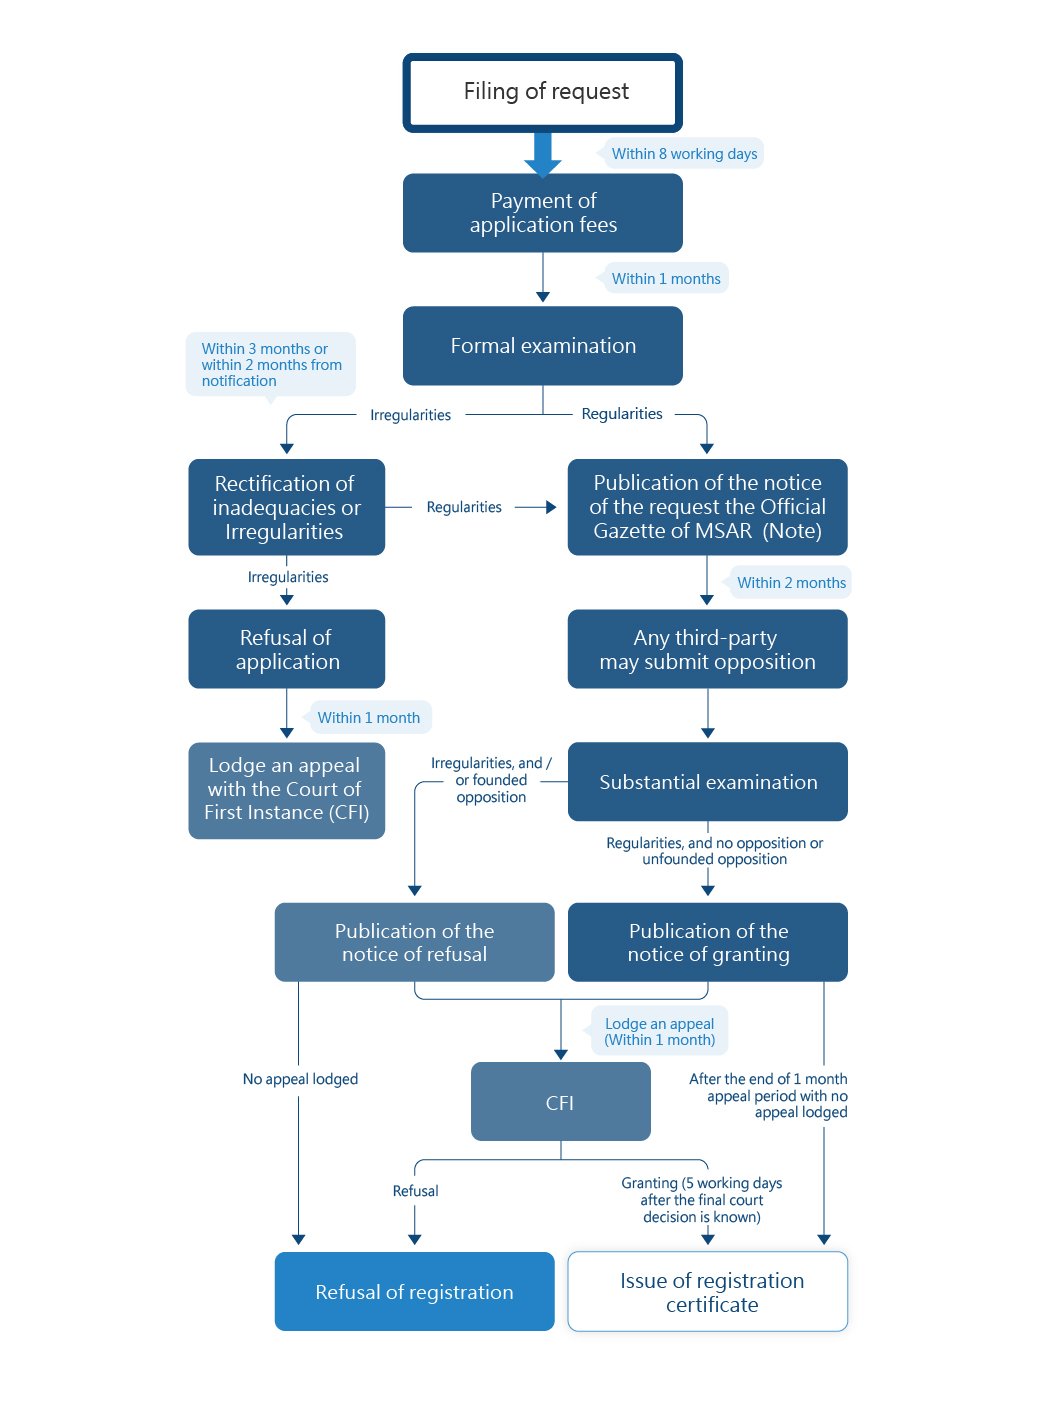 Flowchart of Application Process for Trademark